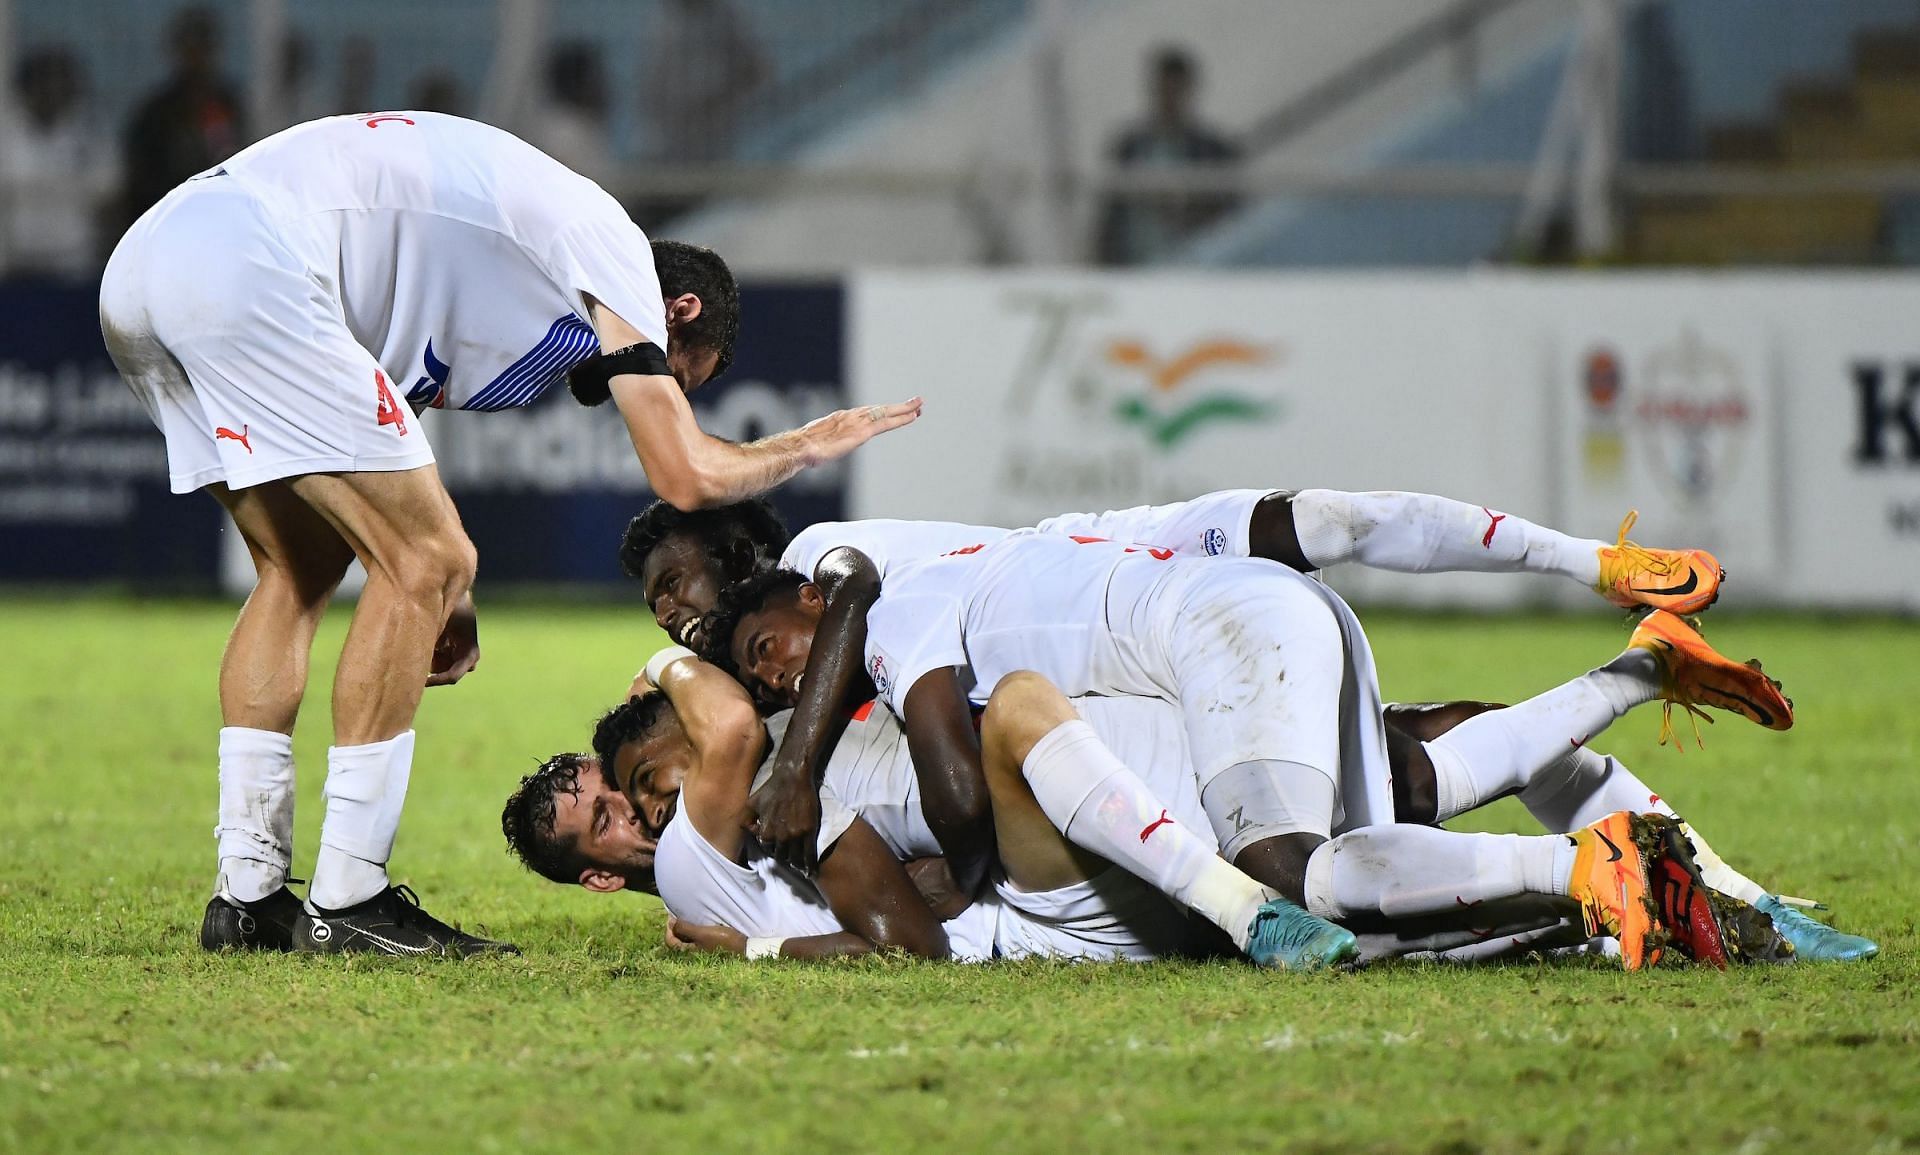 Bengaluru FC beat Odisha FC 2-1 to secure their spot in the 2022 Durand Cup semifinals. [Credit: Suman Chattopadhyay / www.imagesolutionr.in]